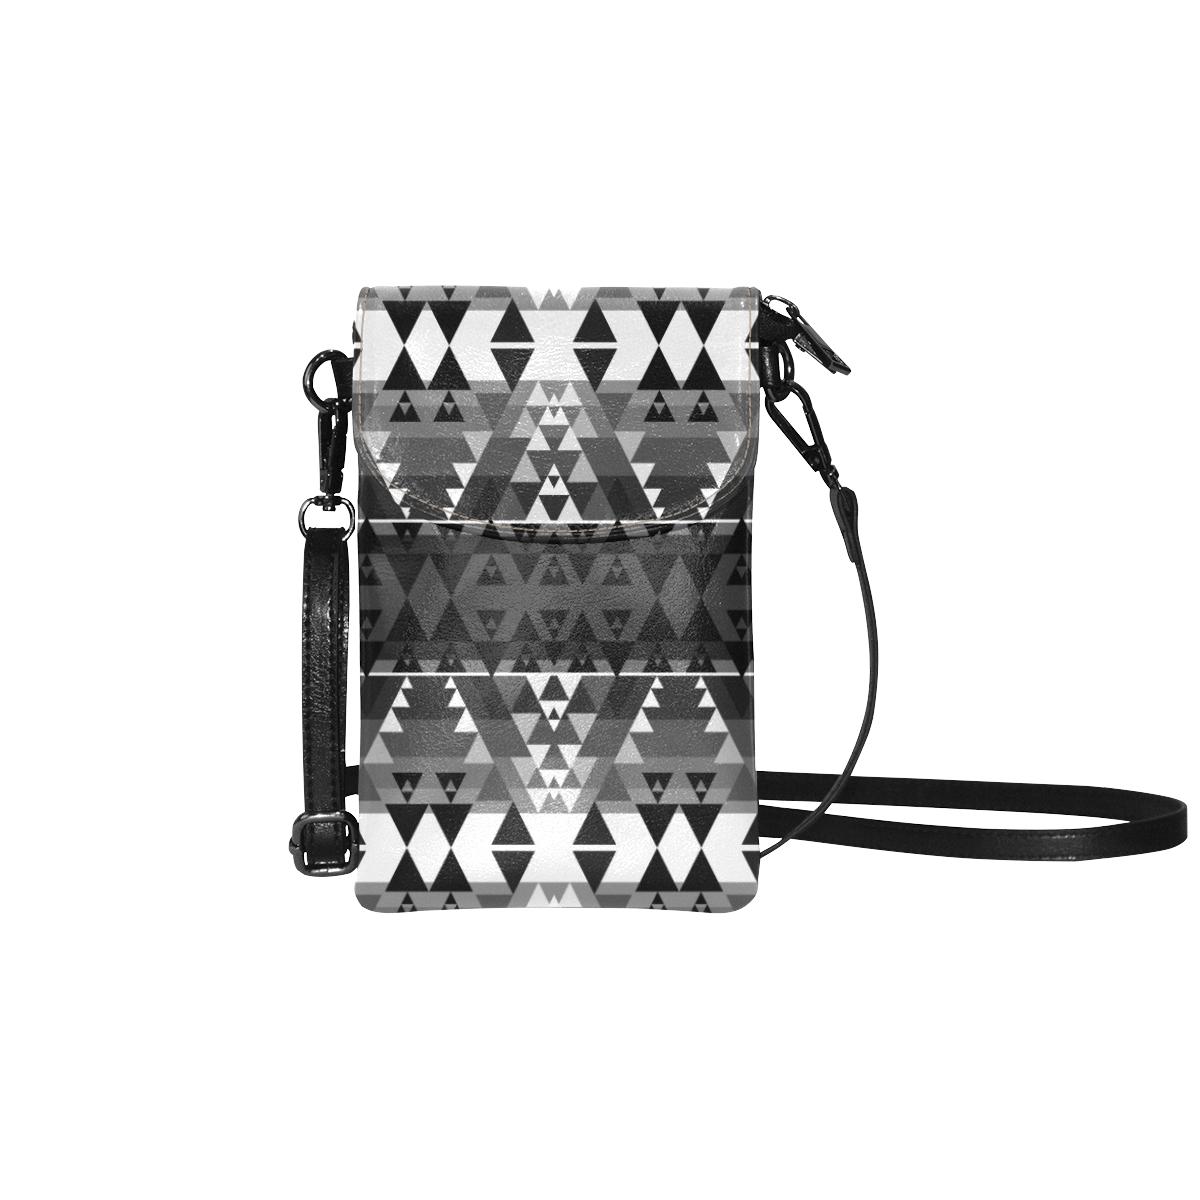 Writing on Stone Black and White Small Cell Phone Purse (Model 1711) Small Cell Phone Purse (1711) e-joyer 